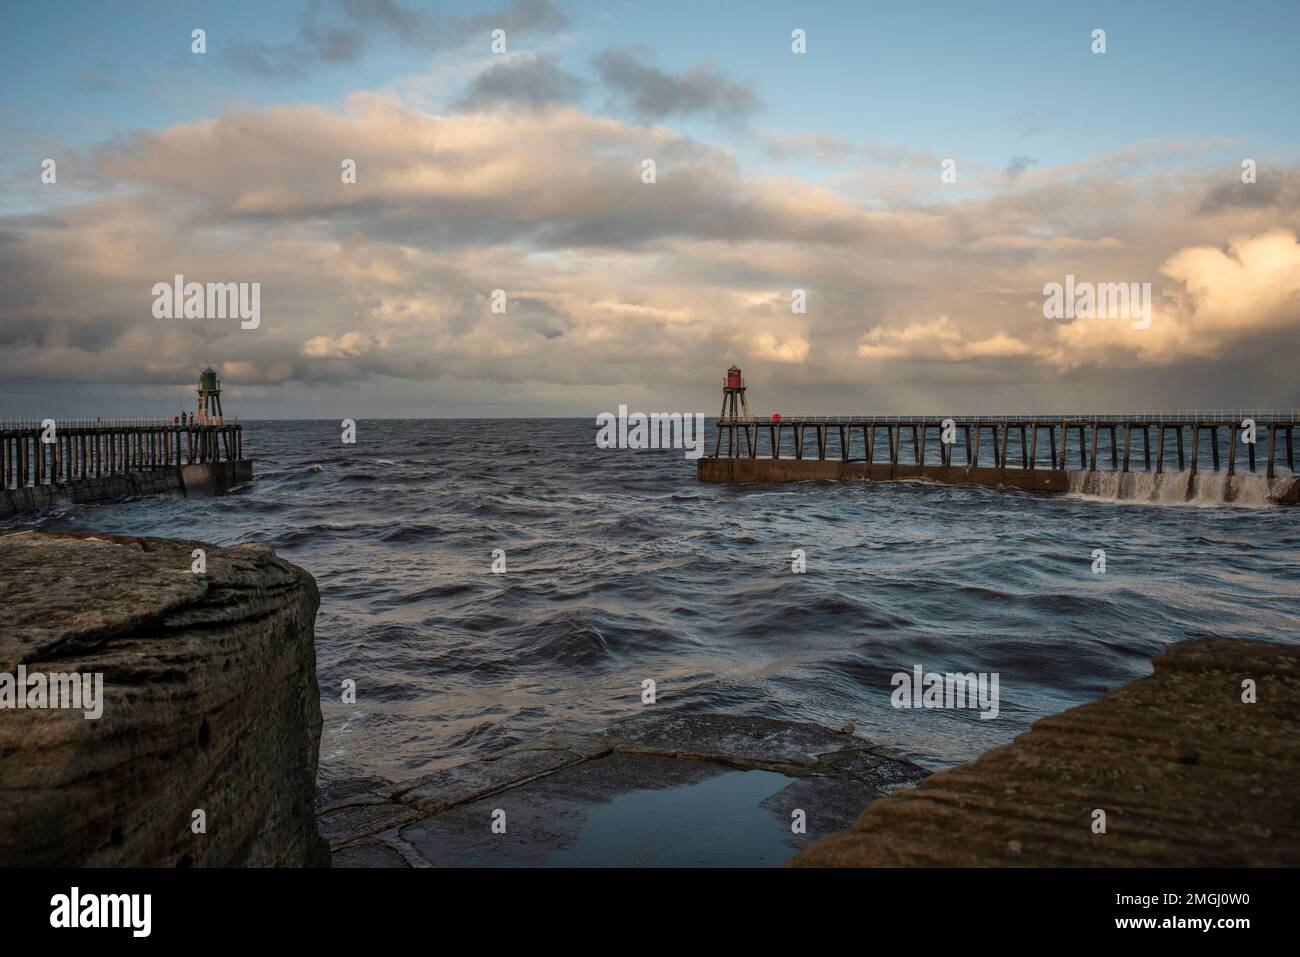 The Victorian lighthouses marking the entrance/exit from the port of Whitby, North Yorkshire, UK Stock Photo